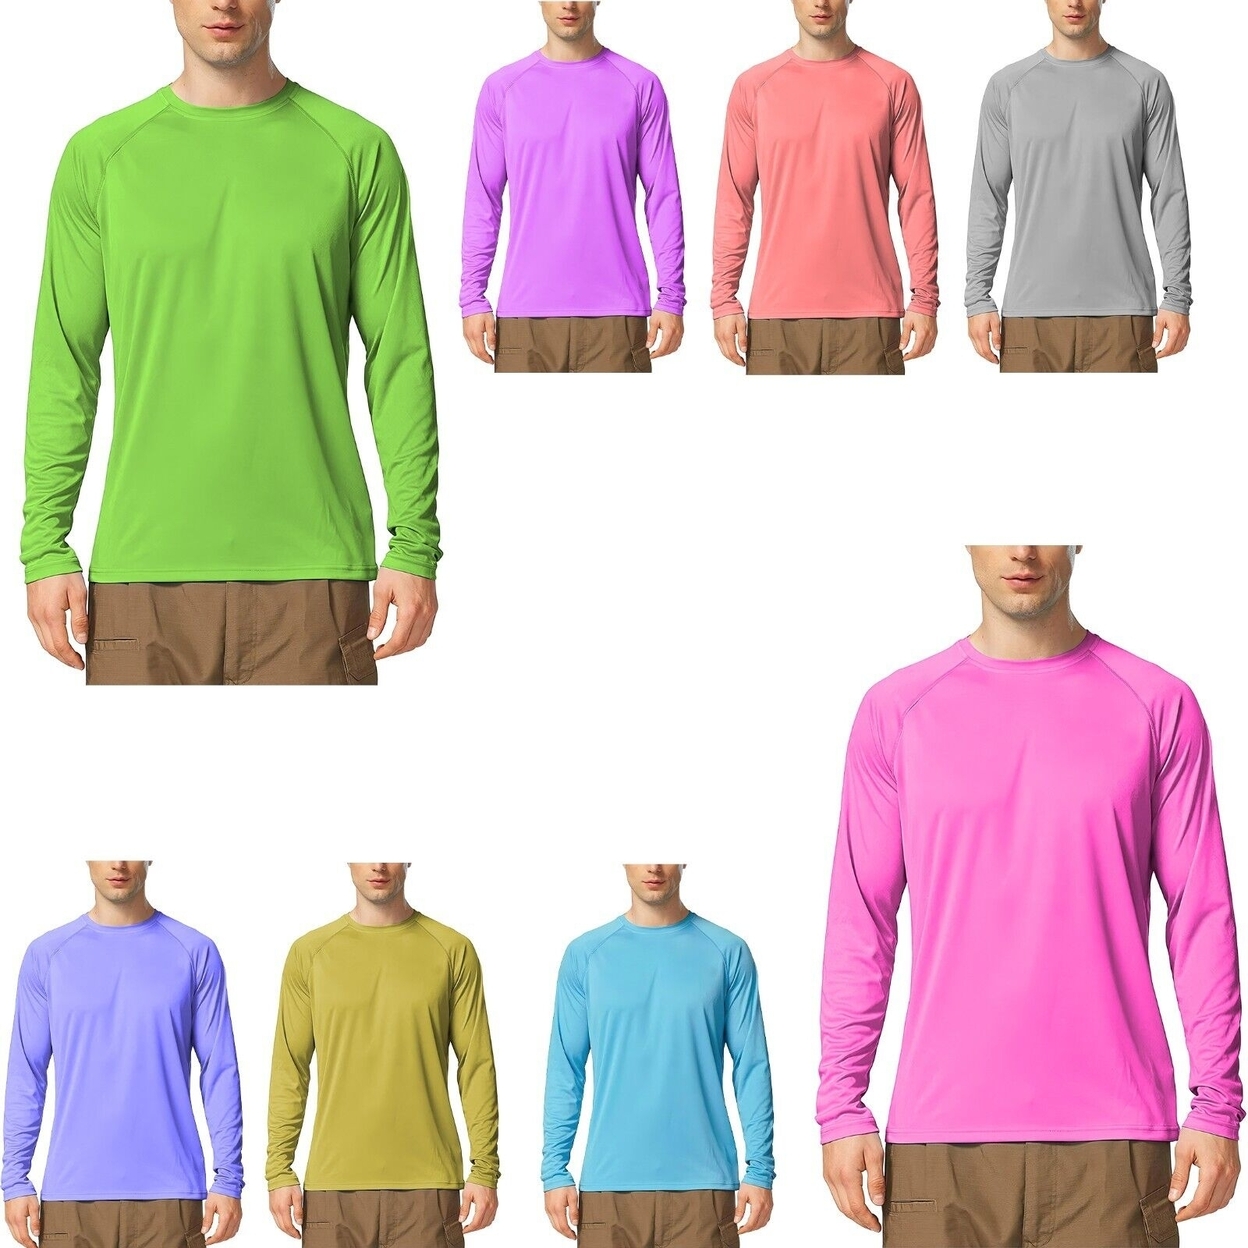 Multi-Pack: Men's Dri-Fit Moisture Wicking Athletic Cool Performance Slim Fit Long Sleeve T-Shirts - 1-pack, X-large